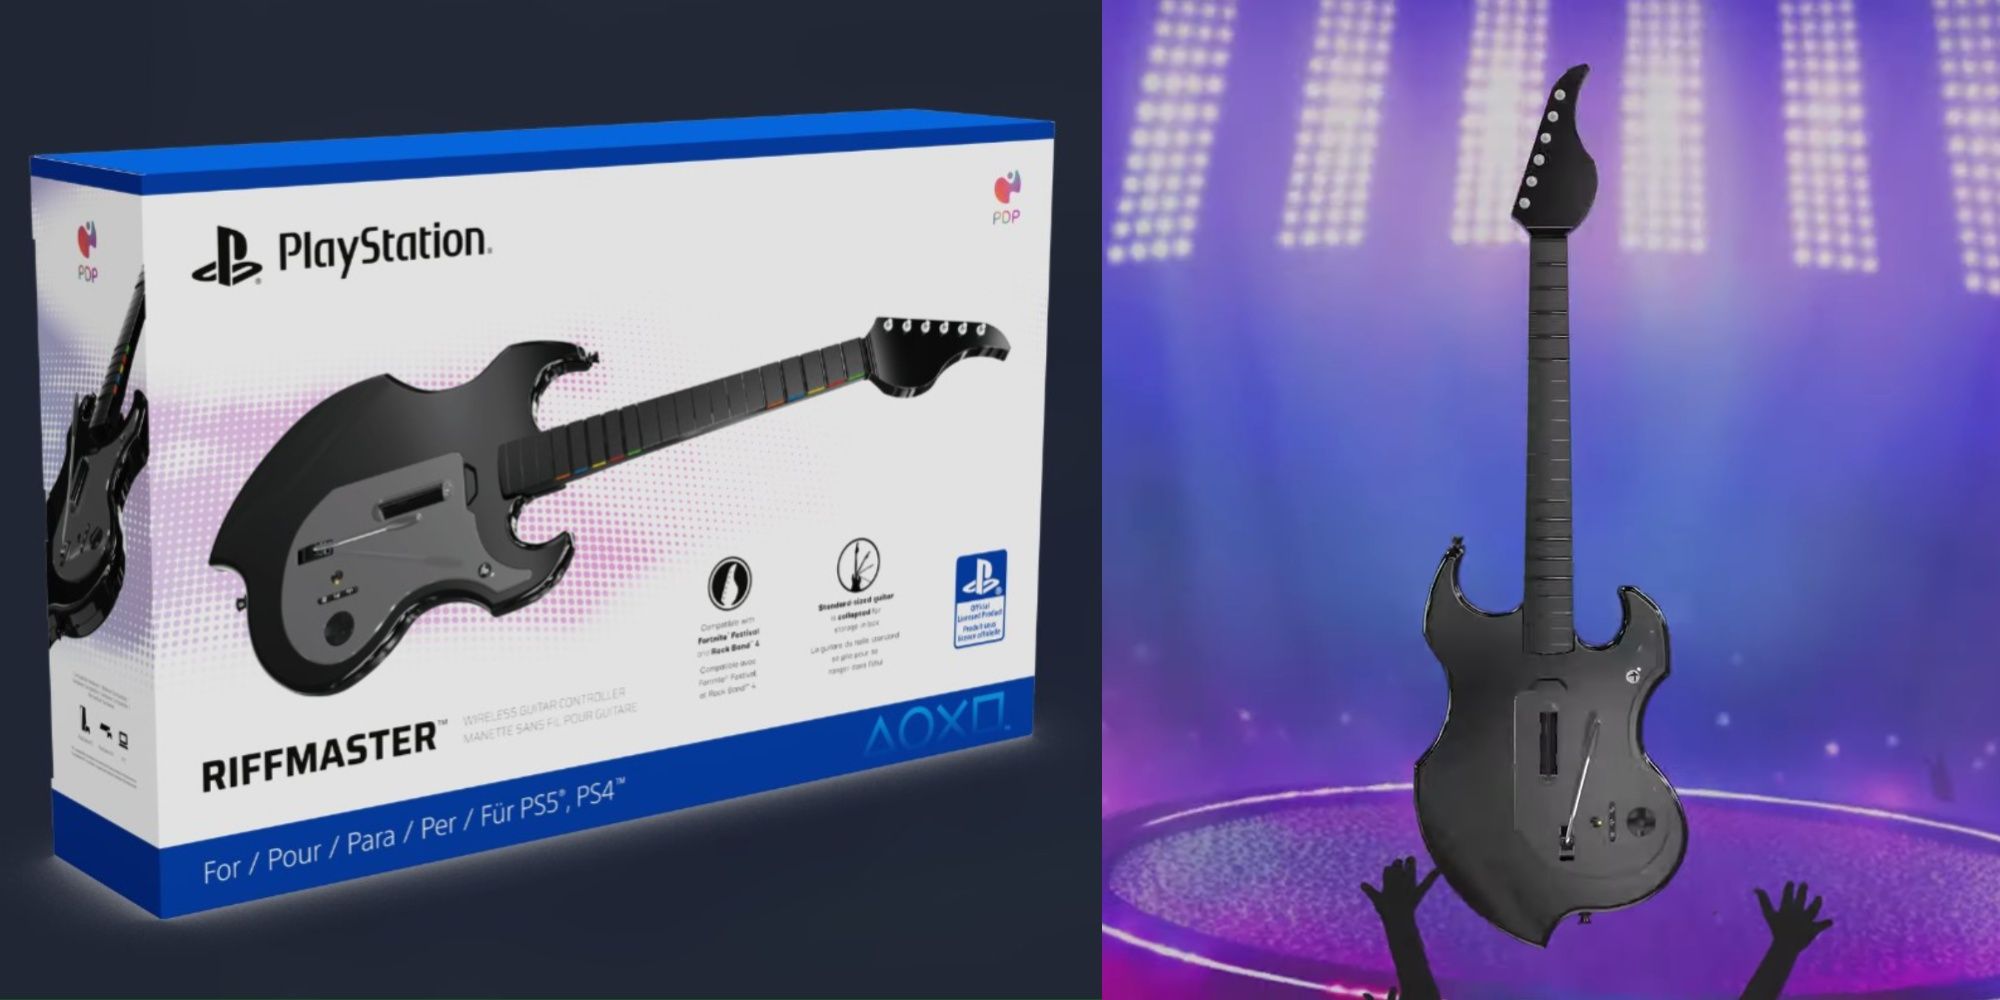 pdp riffmaster in a playstation box and out of the box